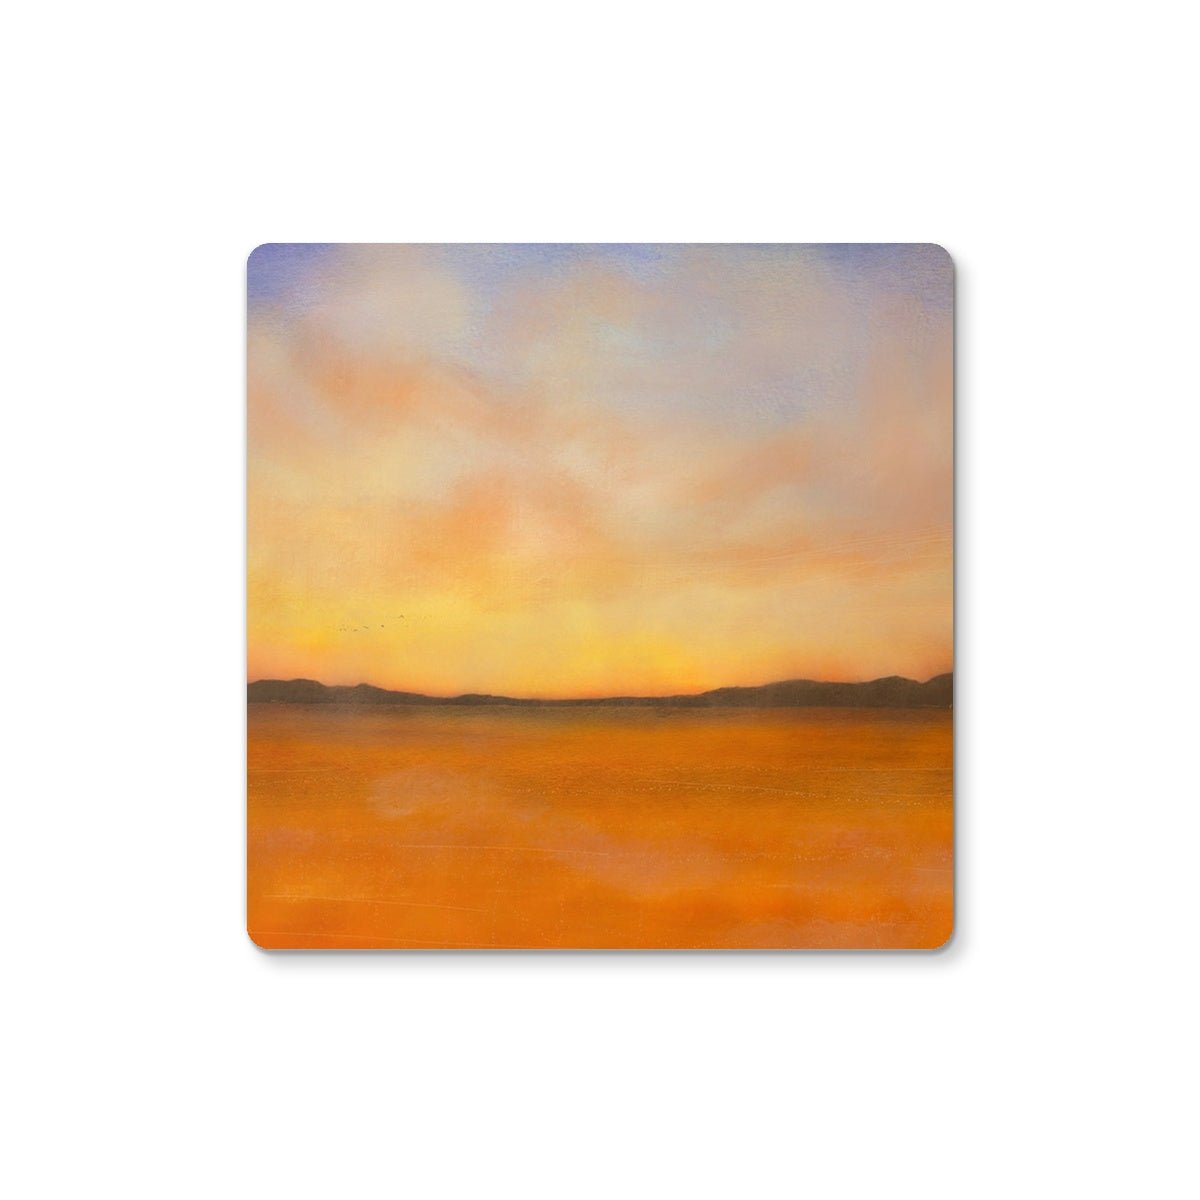 Islay Dawn Art Gifts Coaster-Coasters-Hebridean Islands Art Gallery-Single Coaster-Paintings, Prints, Homeware, Art Gifts From Scotland By Scottish Artist Kevin Hunter